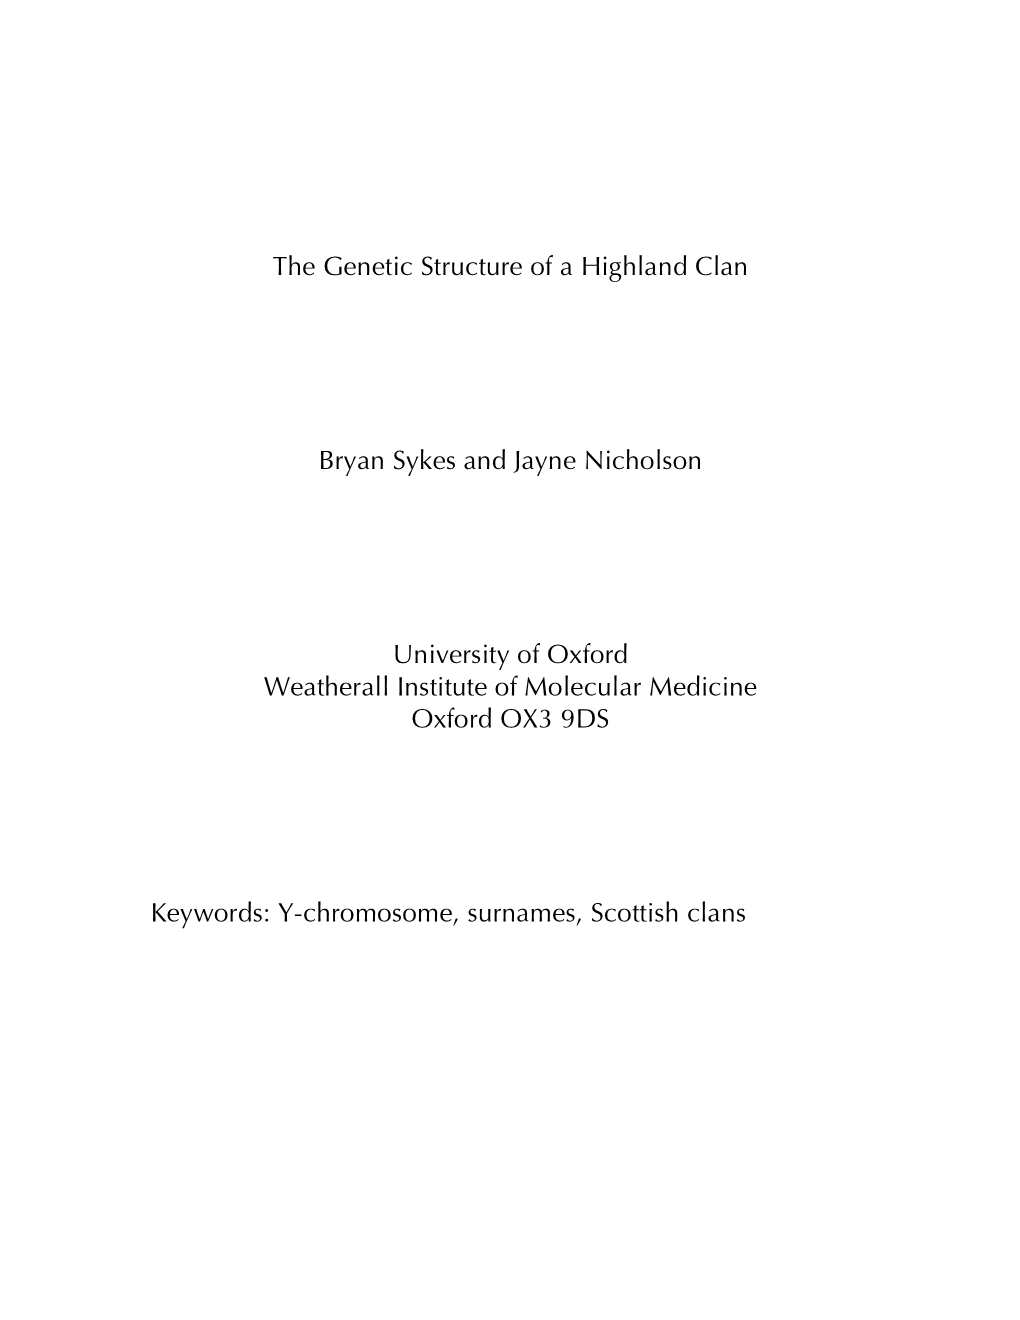 The Genetic Structure of a Highland Clan Bryan Sykes and Jayne